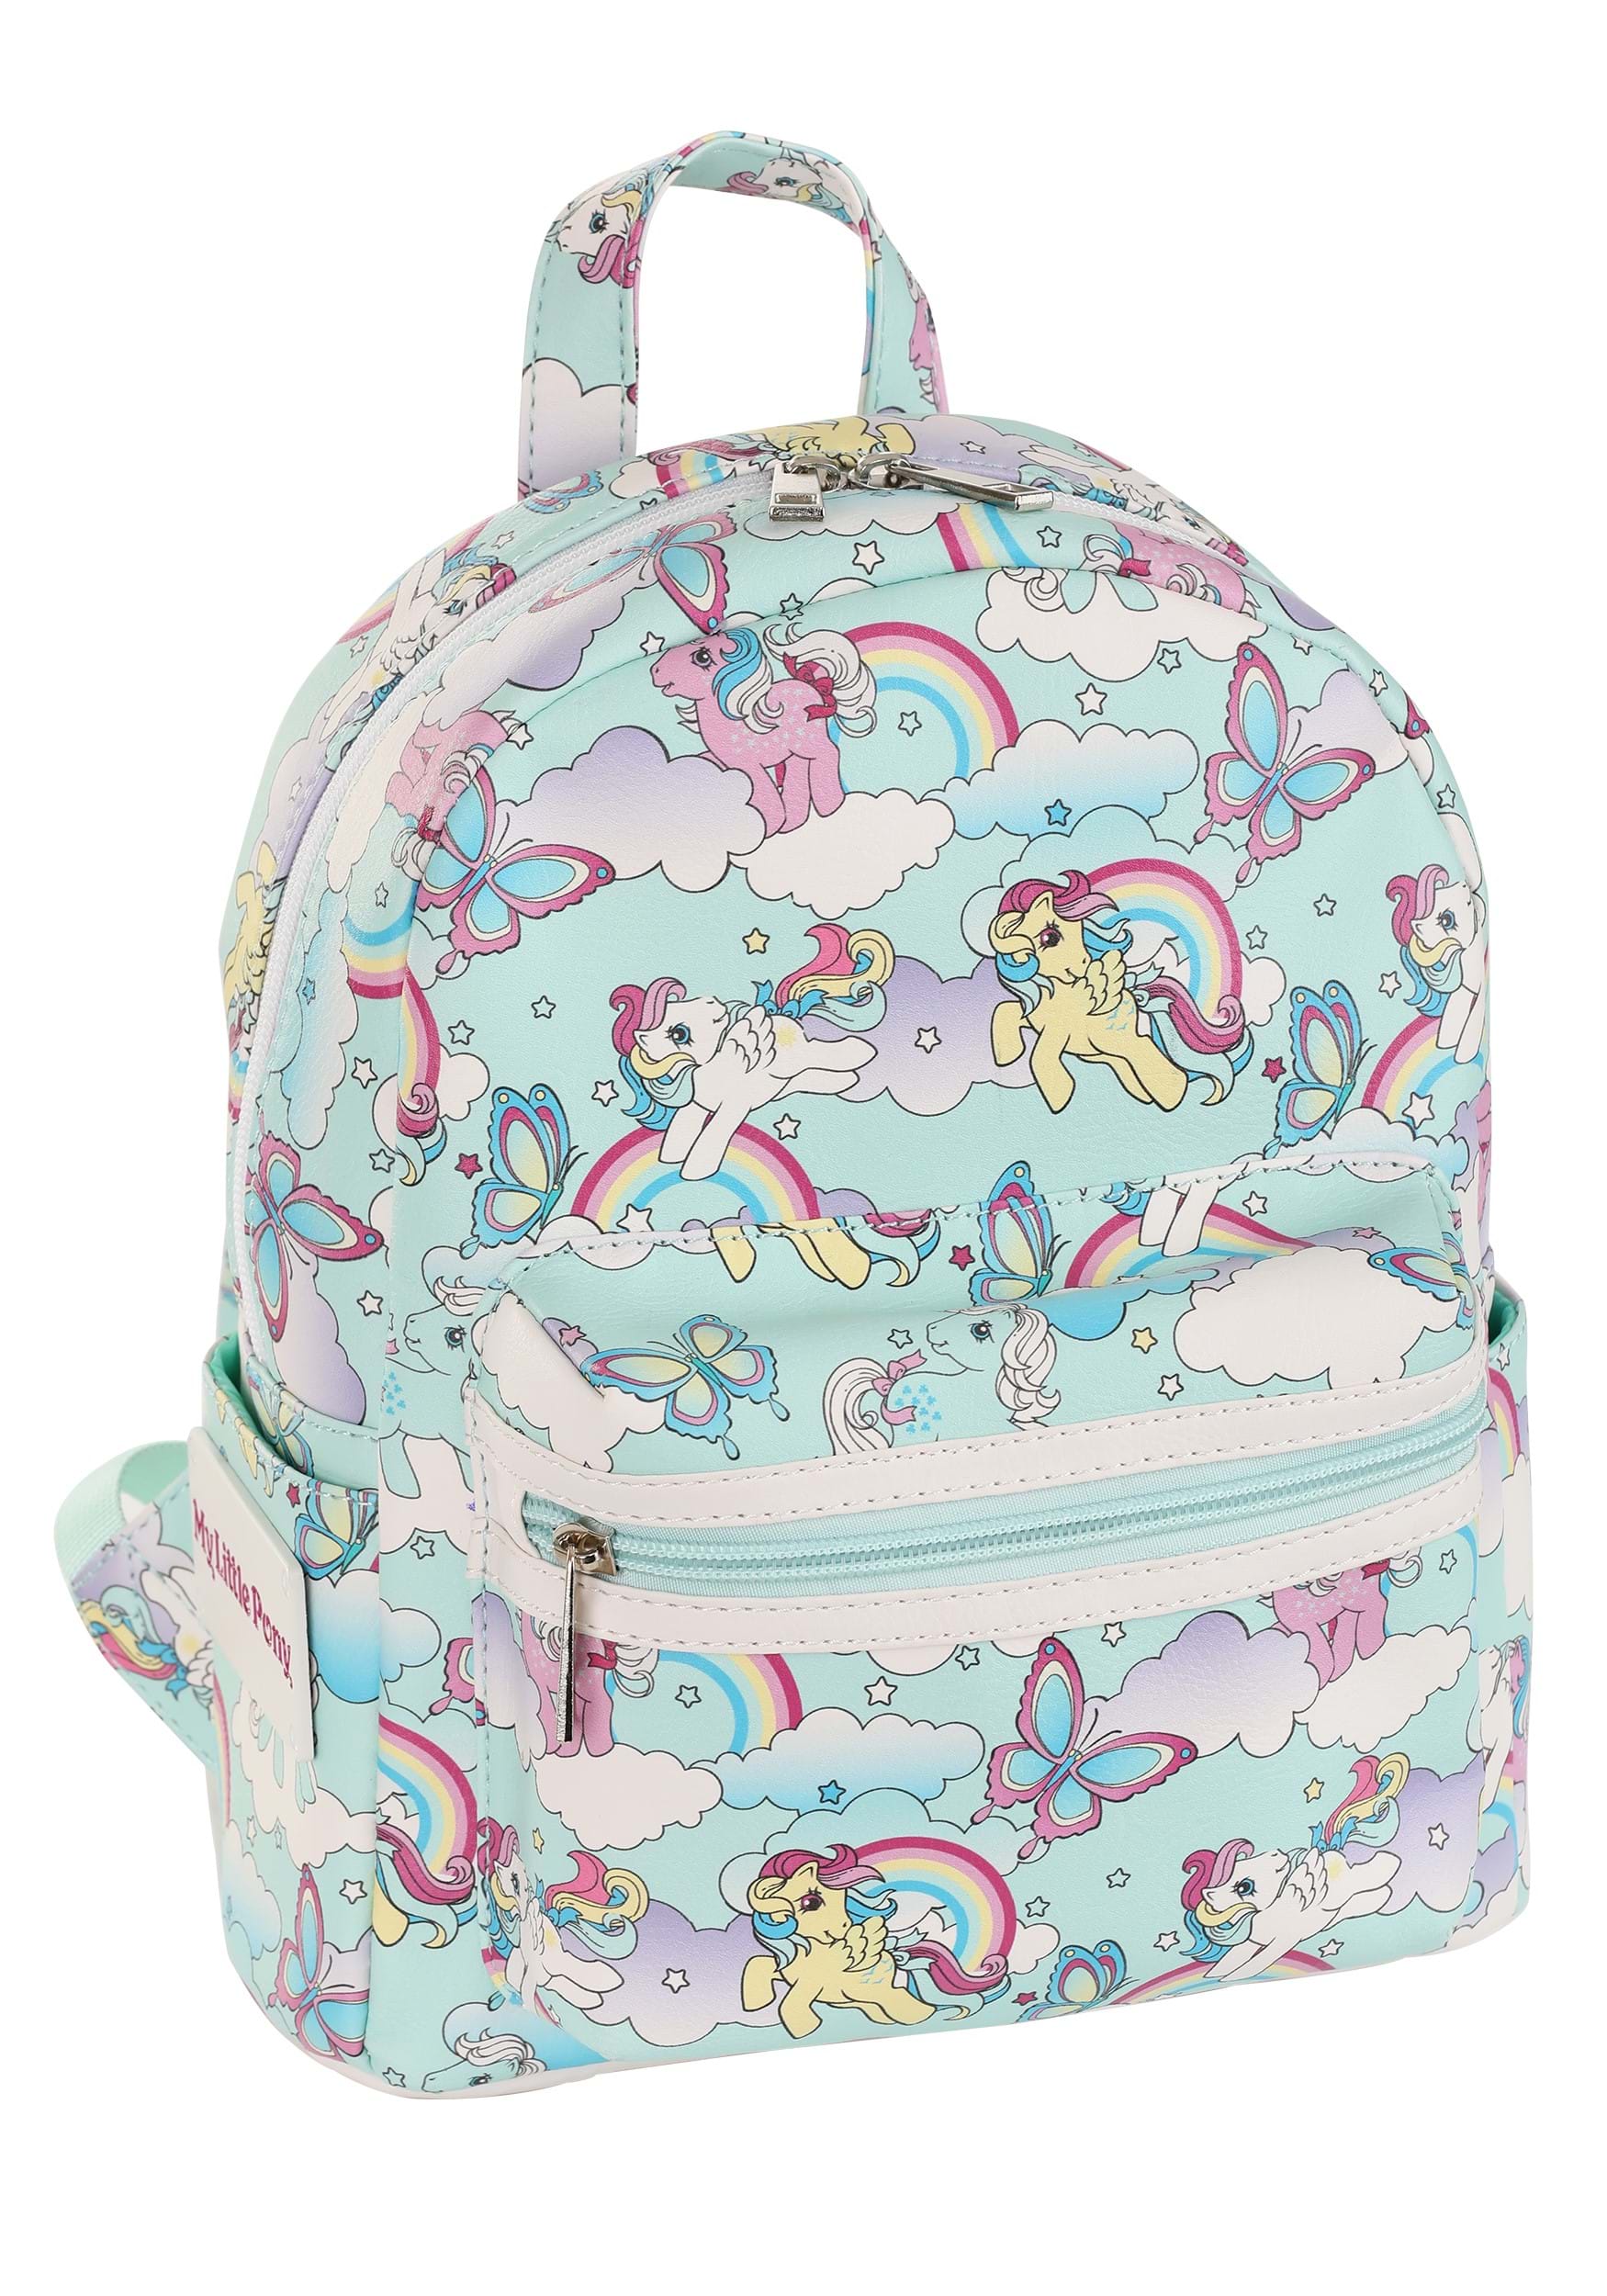 My Little Pony Rainbows and Butterflies Mini Backpack